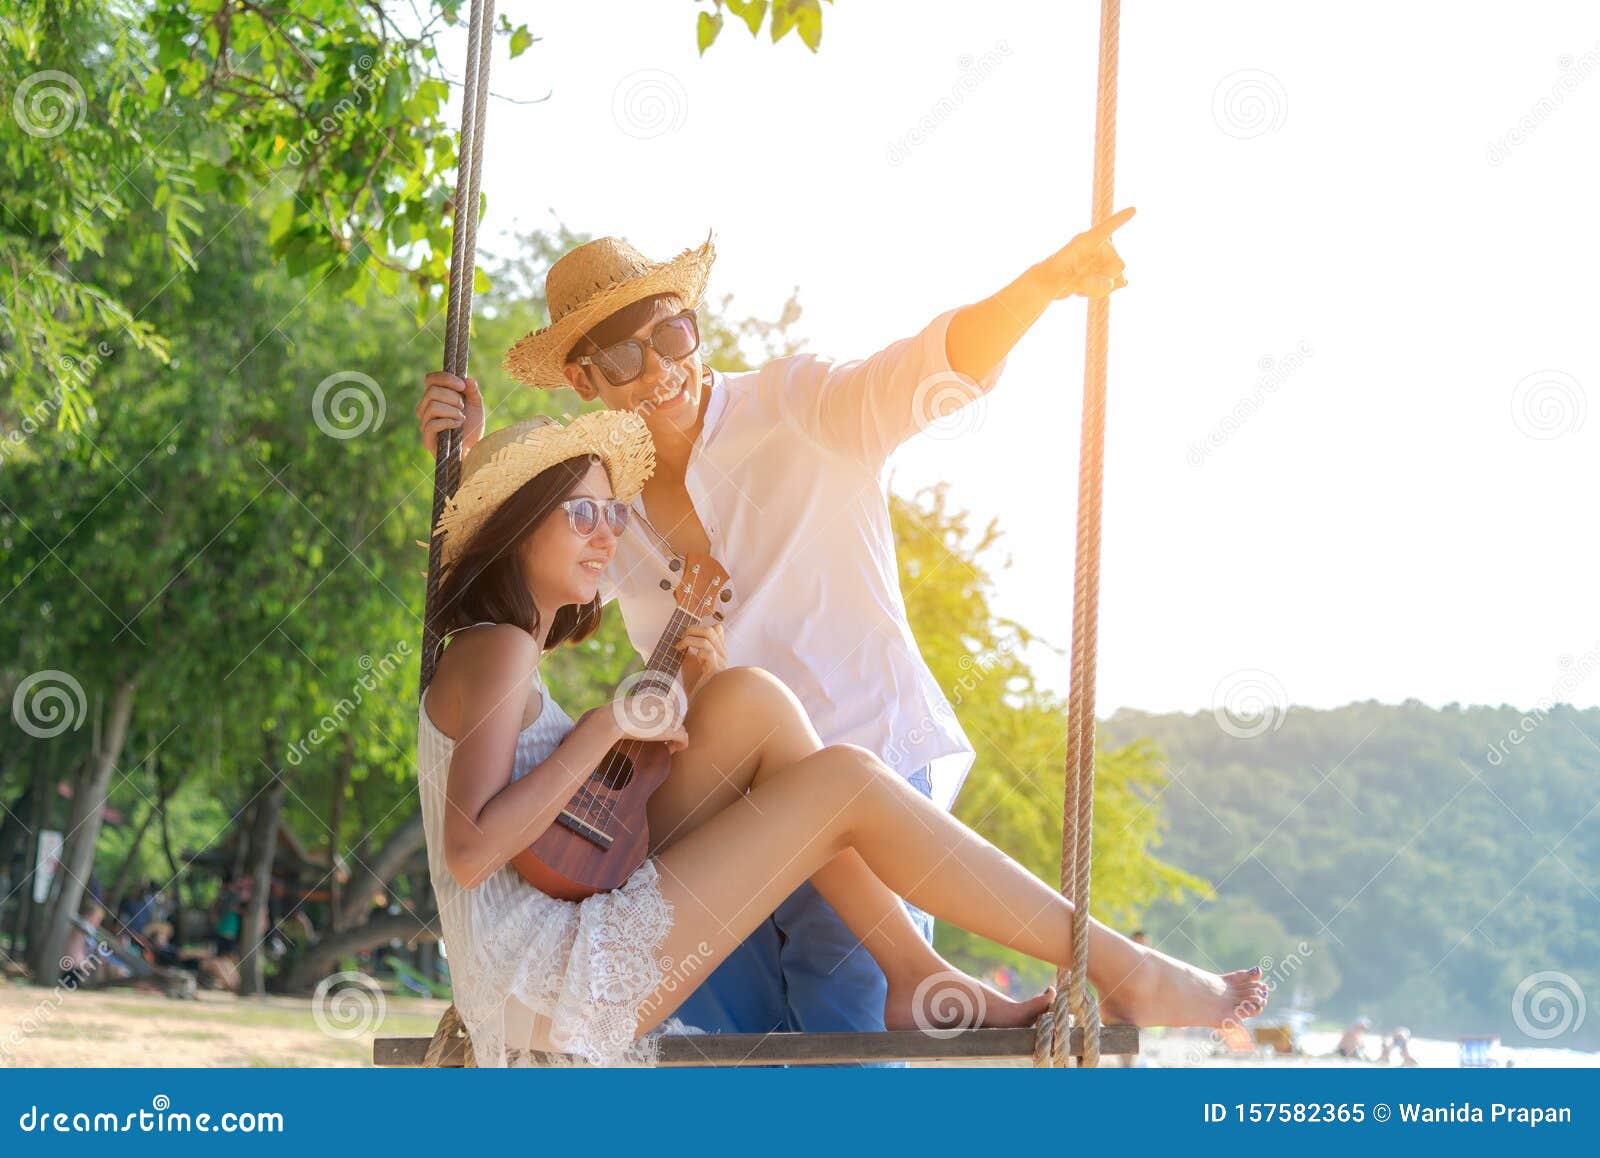 romantic lifestyle asian couples lover playing an ukulele on the hammock. relax